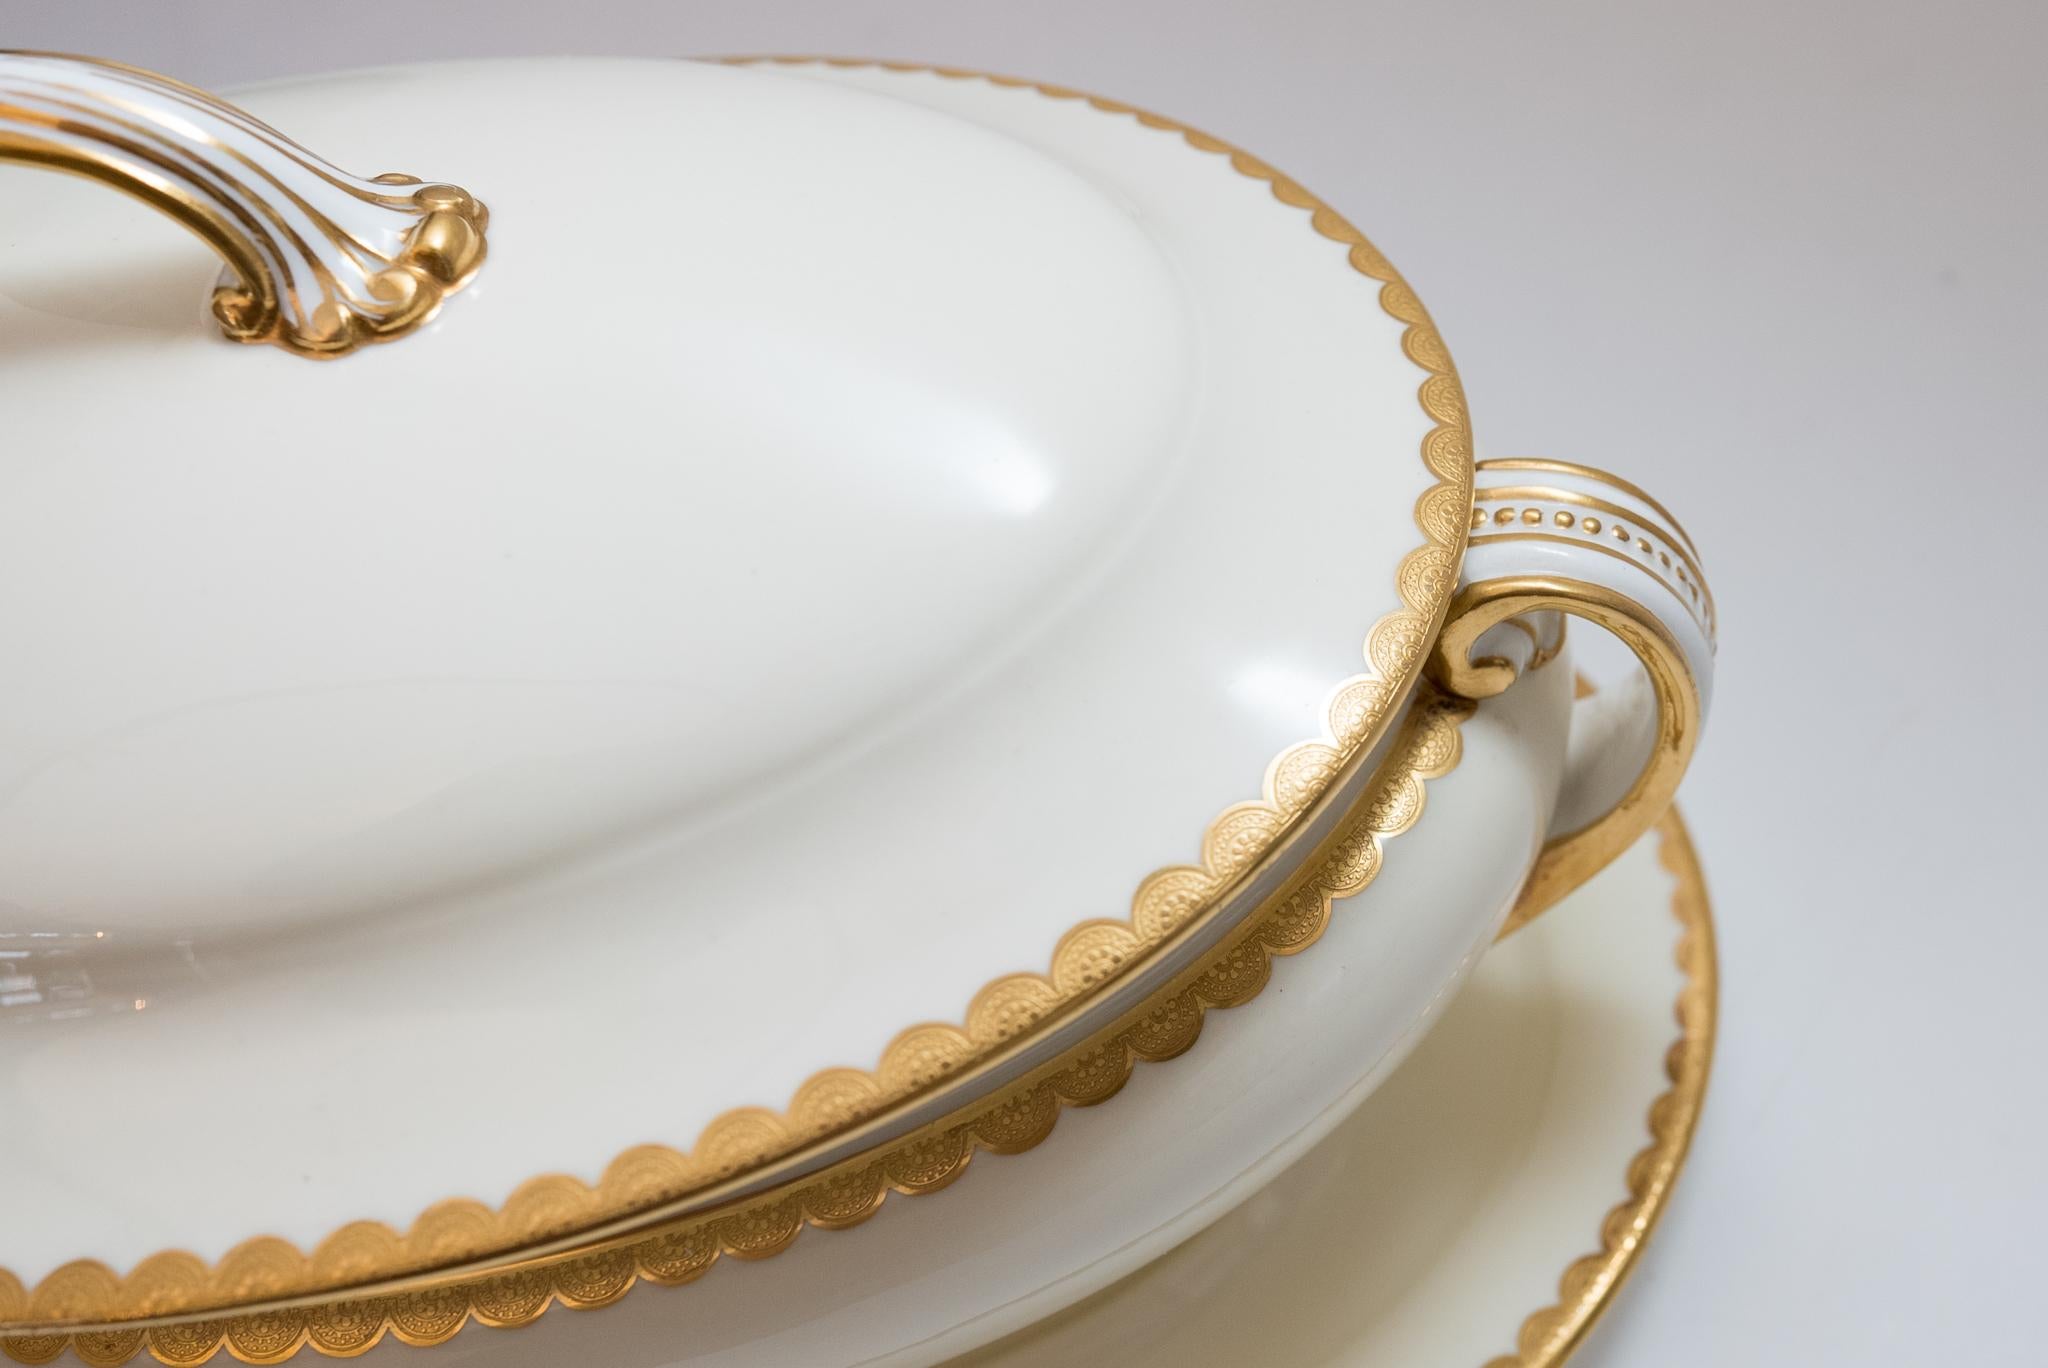 A wonderful serving piece from the re known porcelain firm of Minton, England. This 3 piece set includes the tureen, cover and fitted under plate or platter. Custom ordered through the fine Gilded Age retailer: Davis Collamore New York. It features